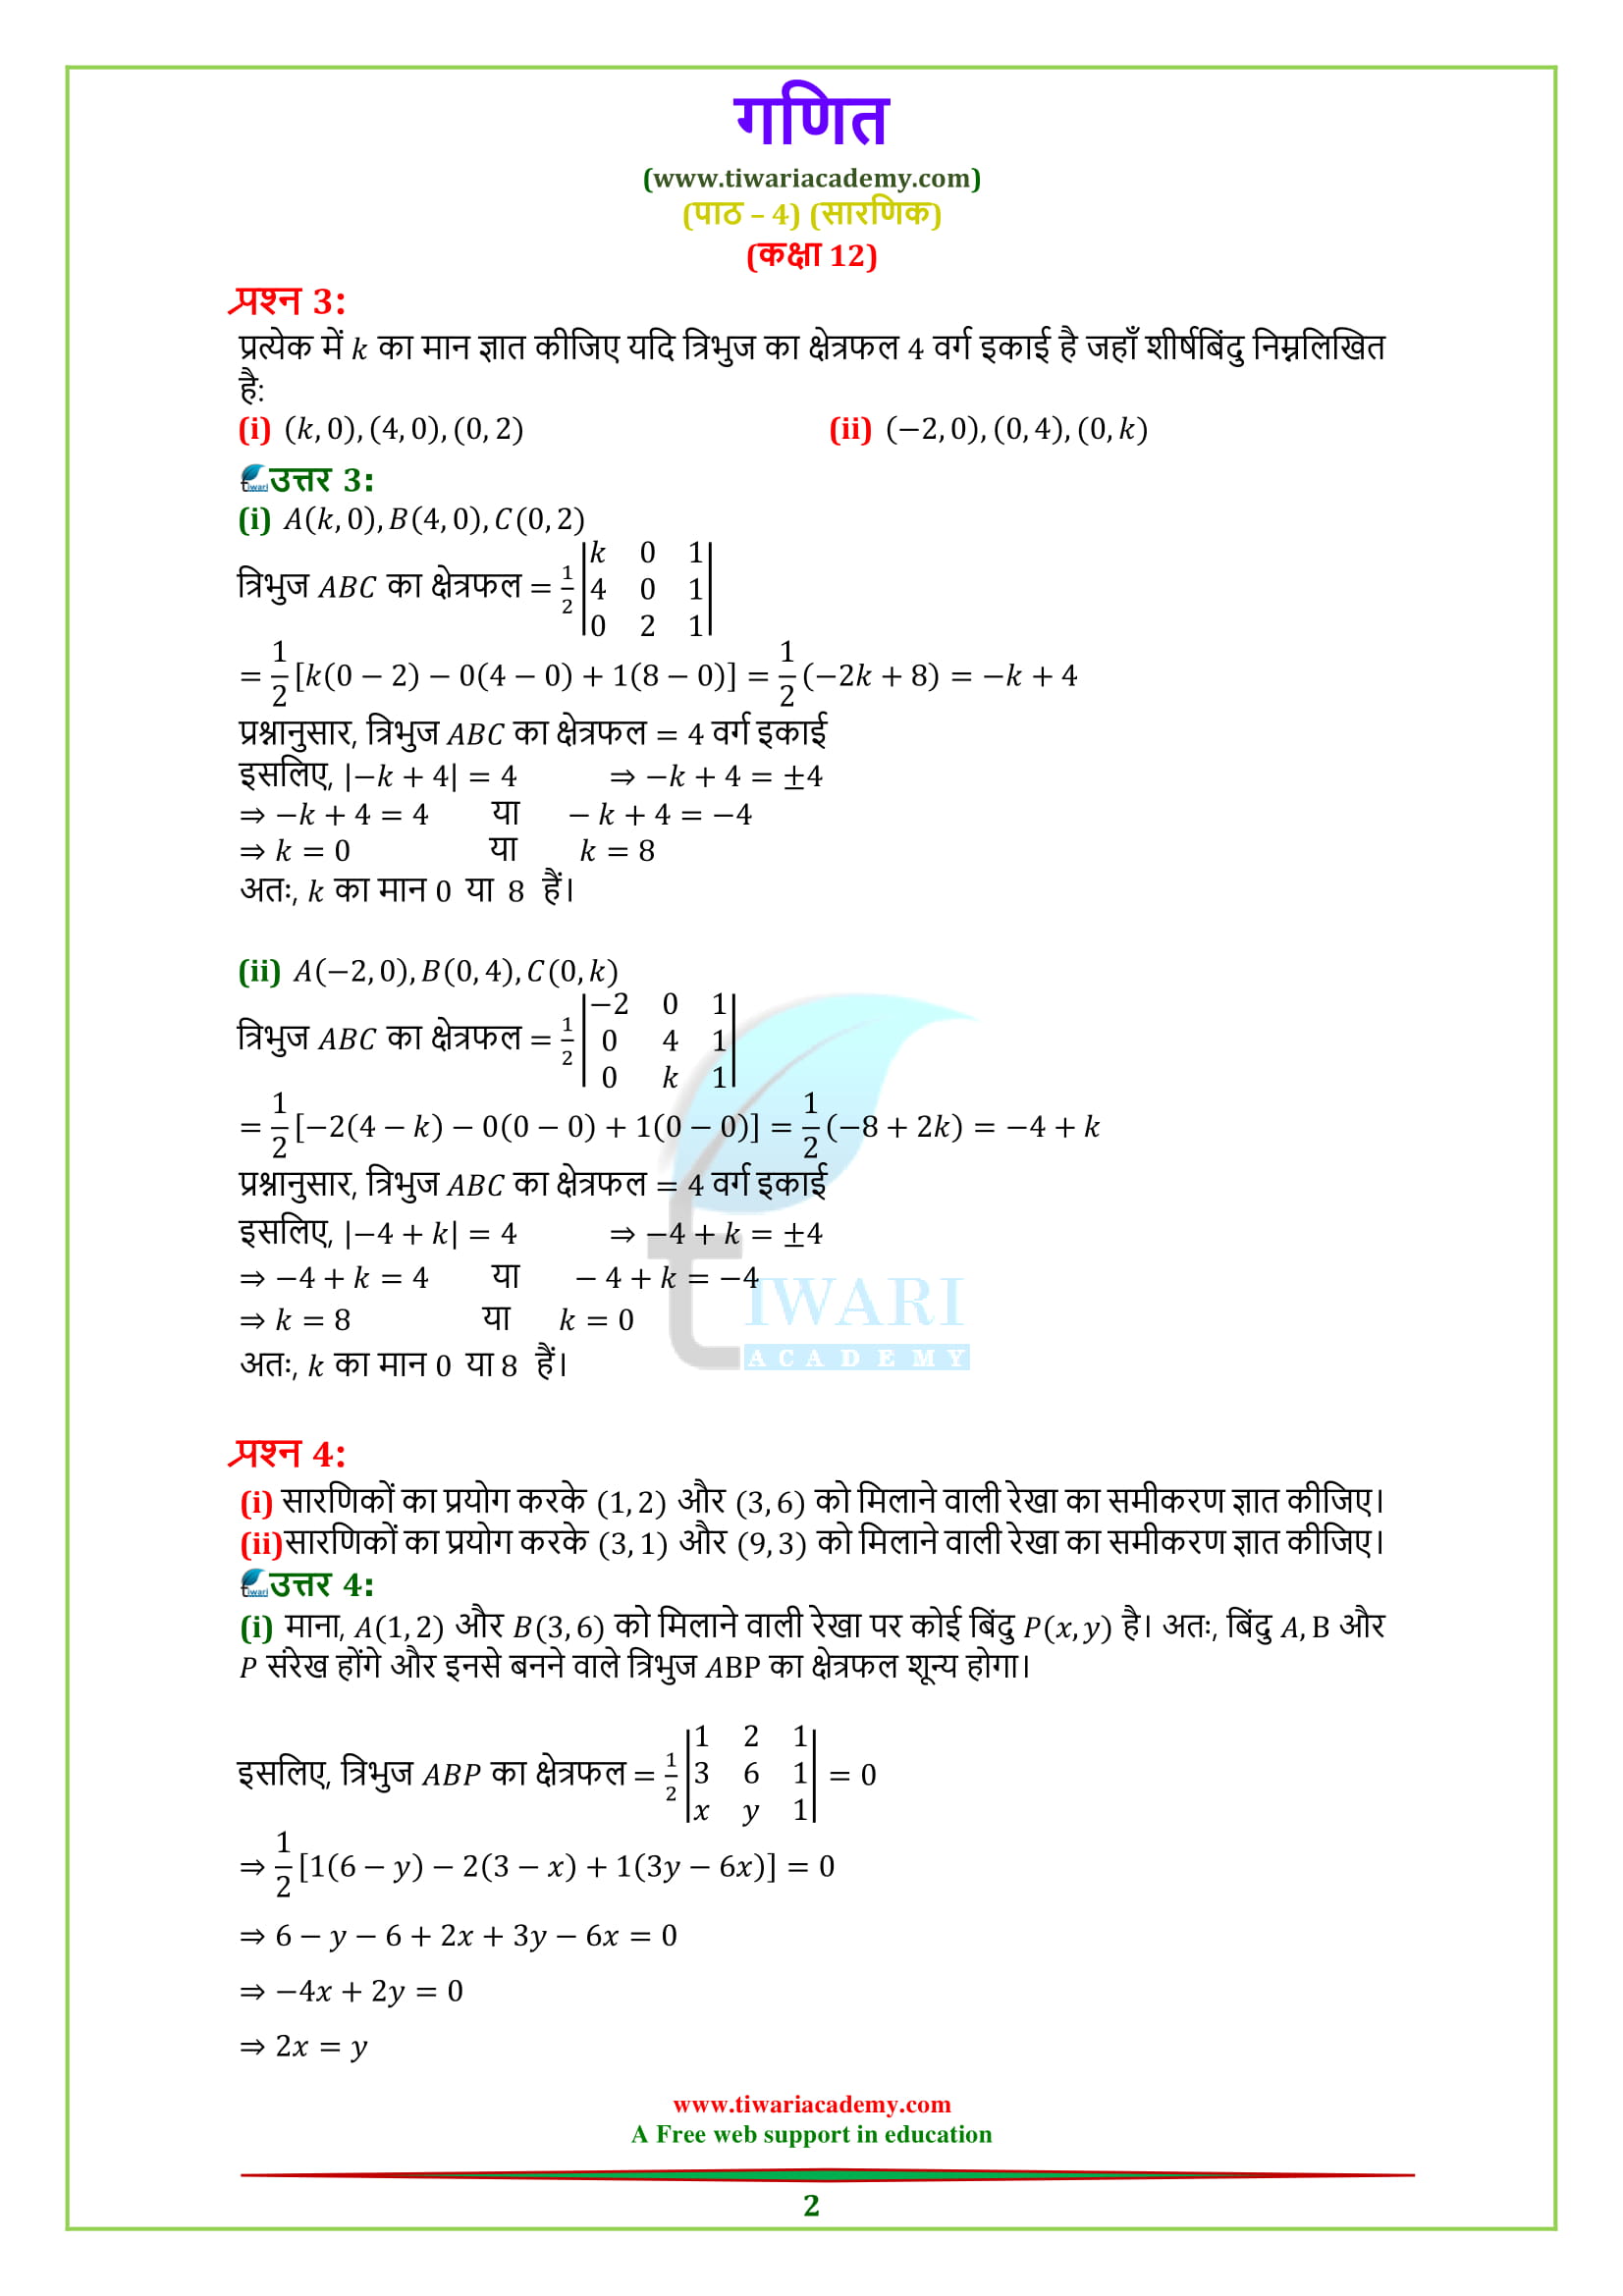 Class 12 Maths Chapter 4 Exercise 4.3 Question 1, 2, 3, 4, 5, 6, 7